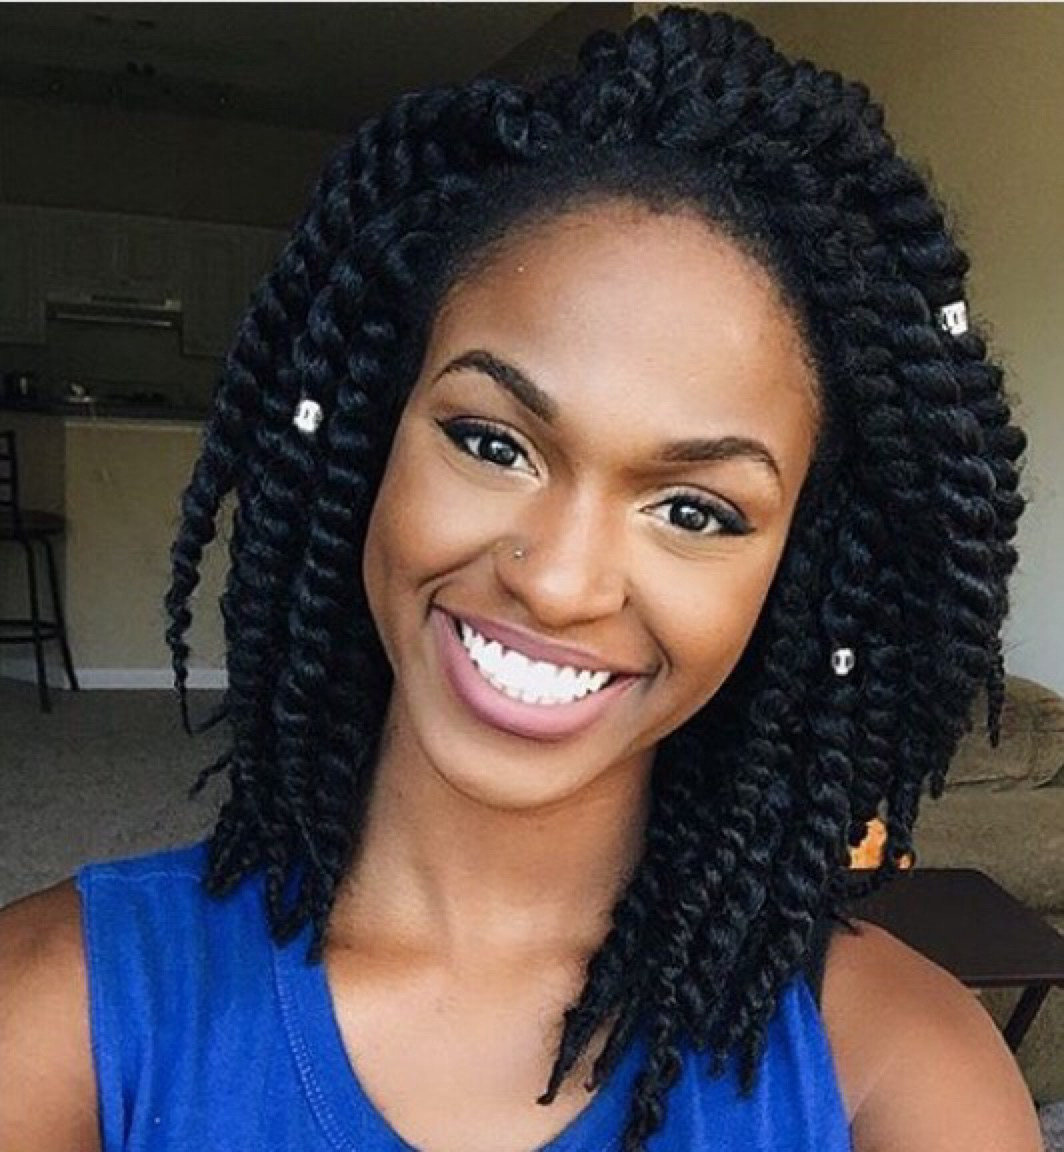 Pics Of Crochet Hairstyles
 20 Best Crochet Braids Hairstyle Ideas for Black Girls 2016